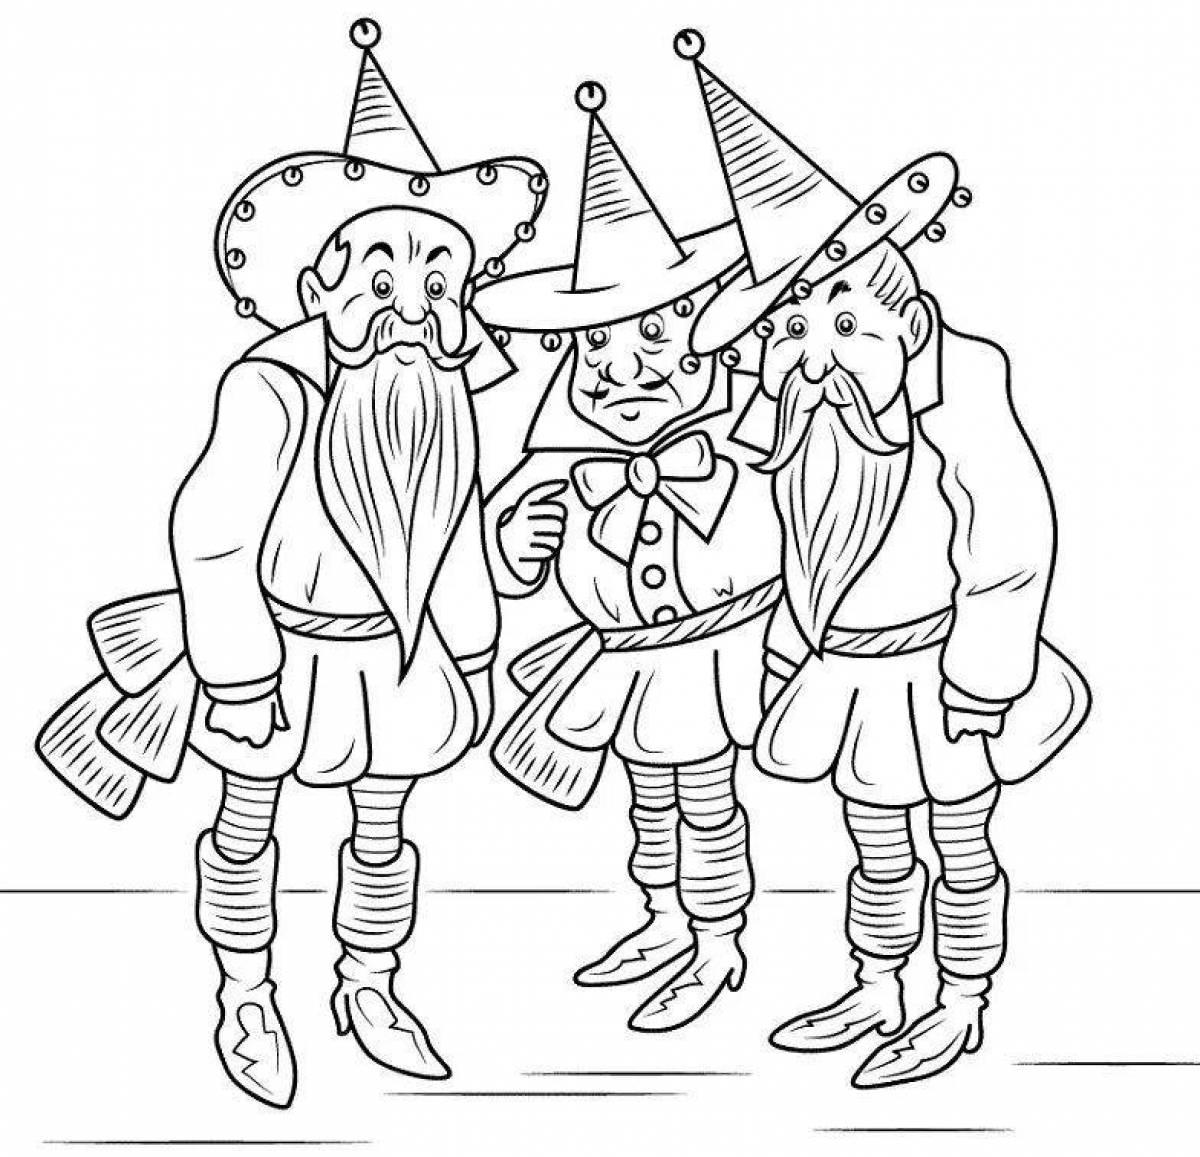 Coloring book amazing wizard of oz